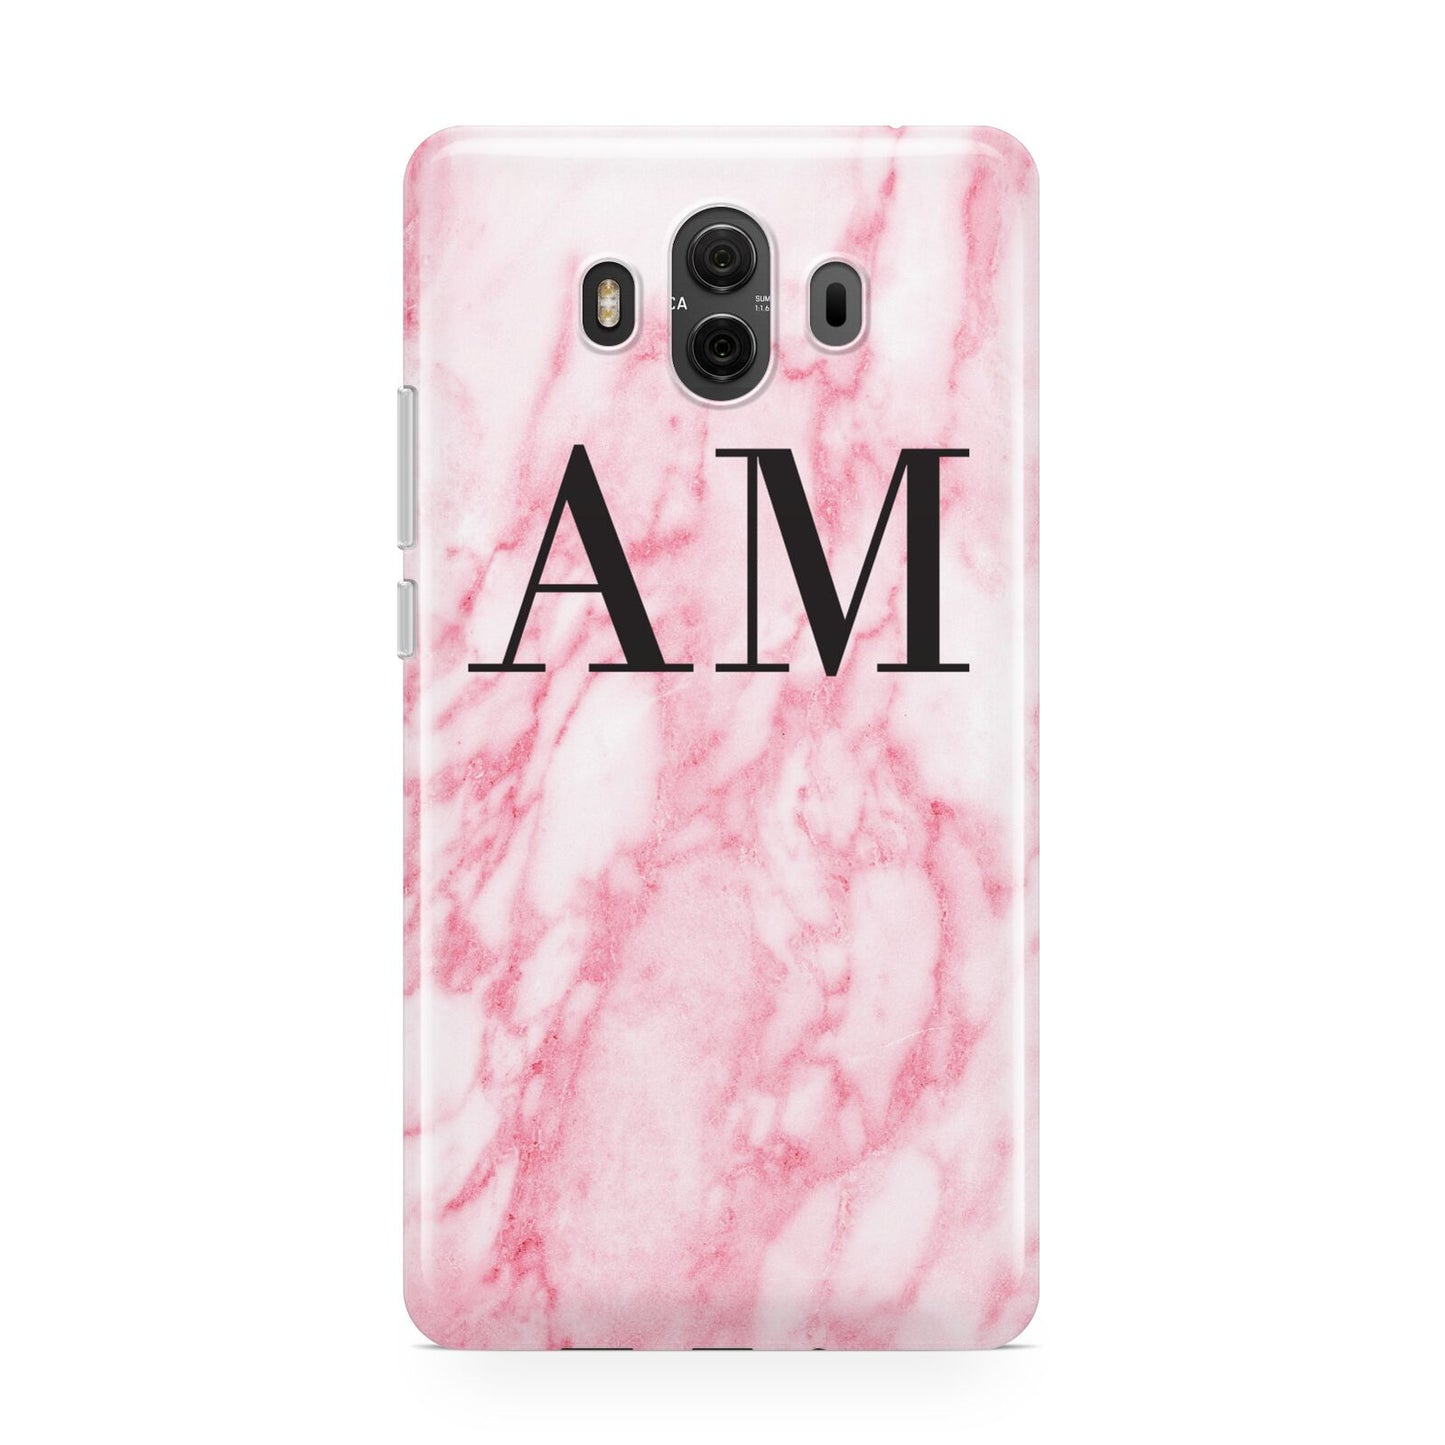 Personalised Pink Marble Monogrammed Huawei Mate 10 Protective Phone Case